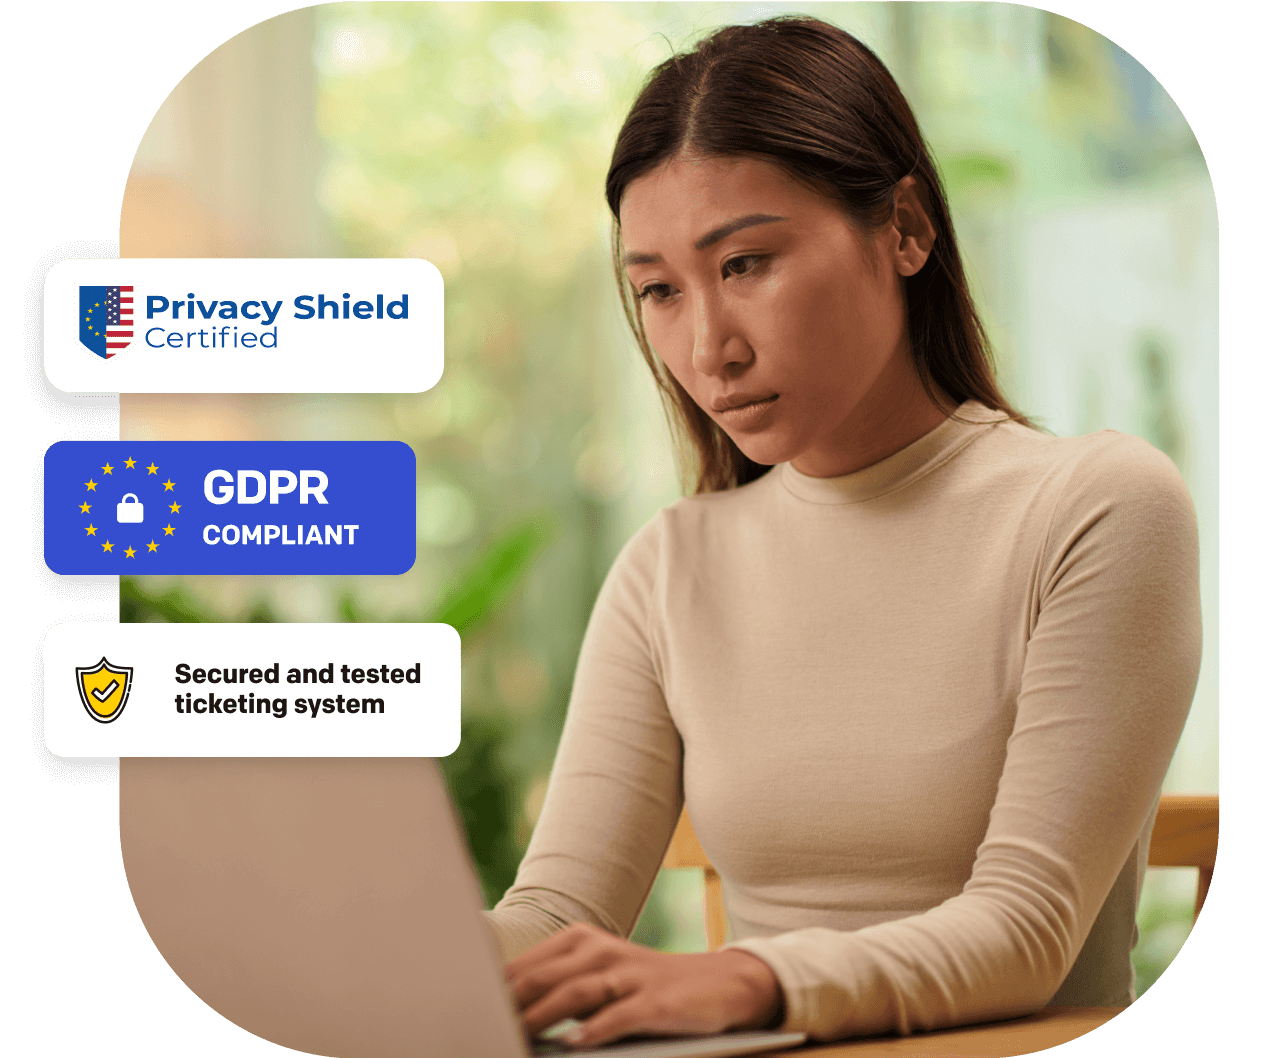 Secure Help Desk Software image showing Privacy Shield certification and GDPR complaint